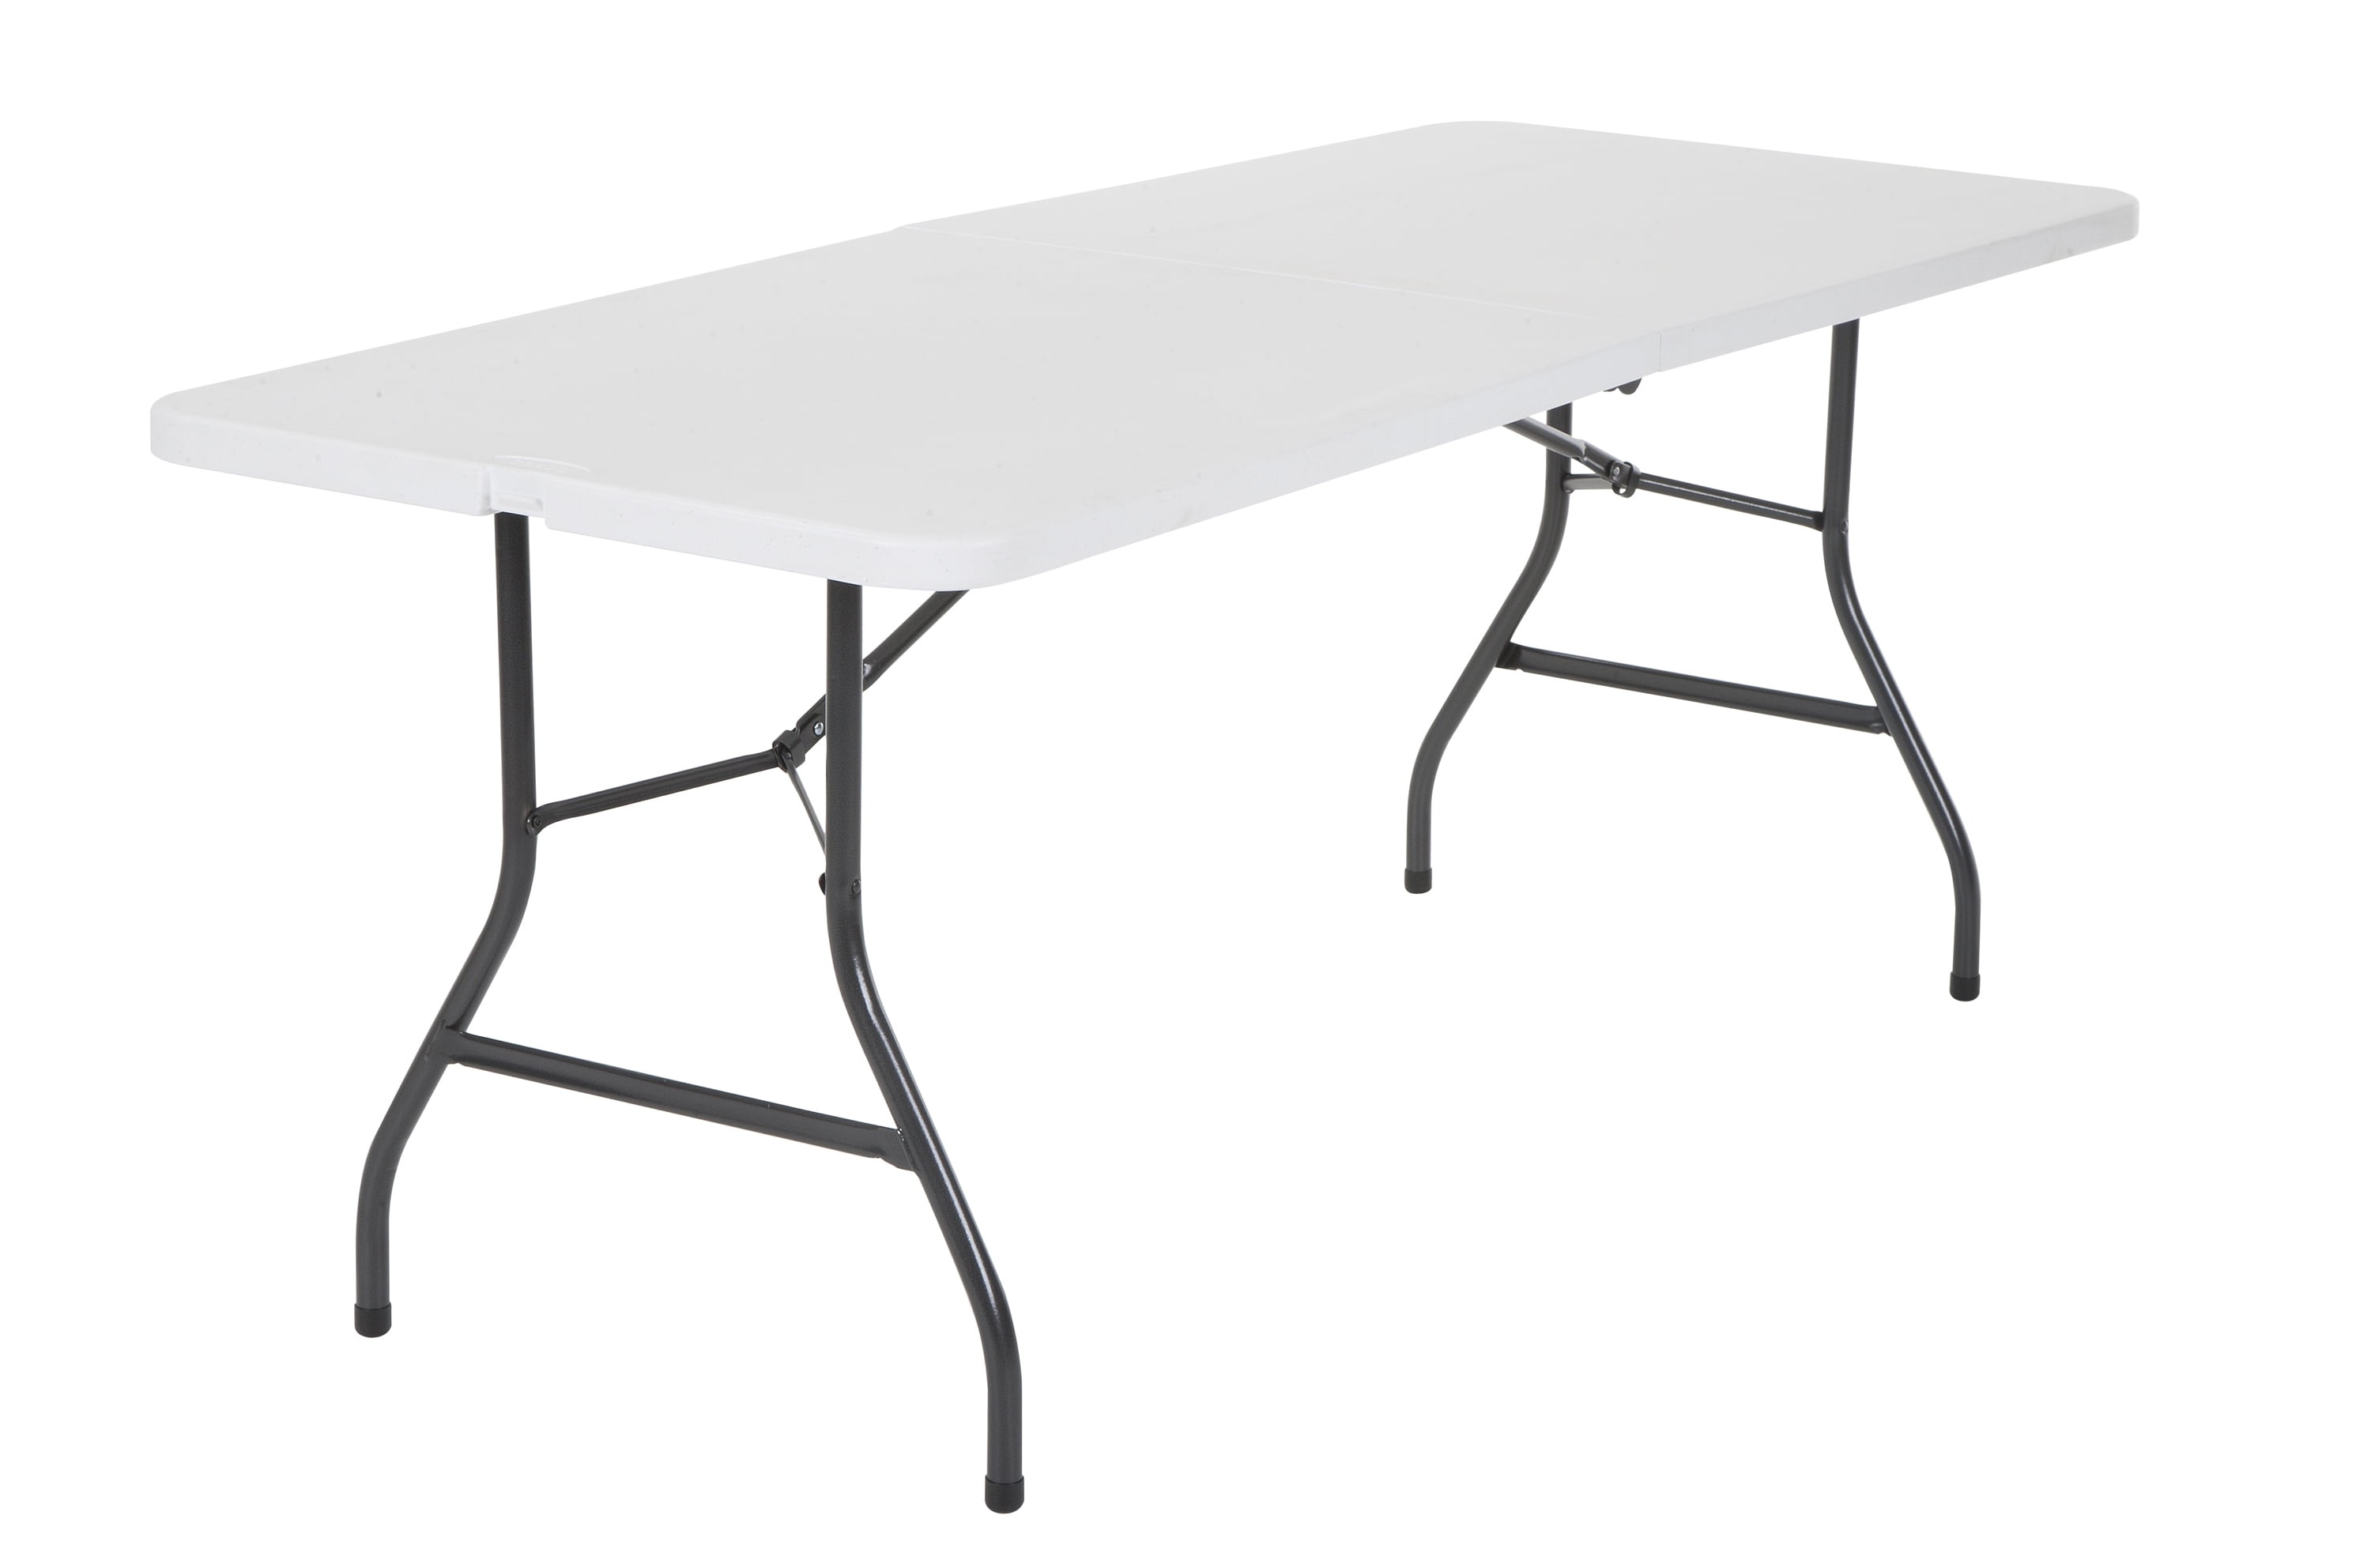 Cosco 6 Foot Centerfold Folding Table, White